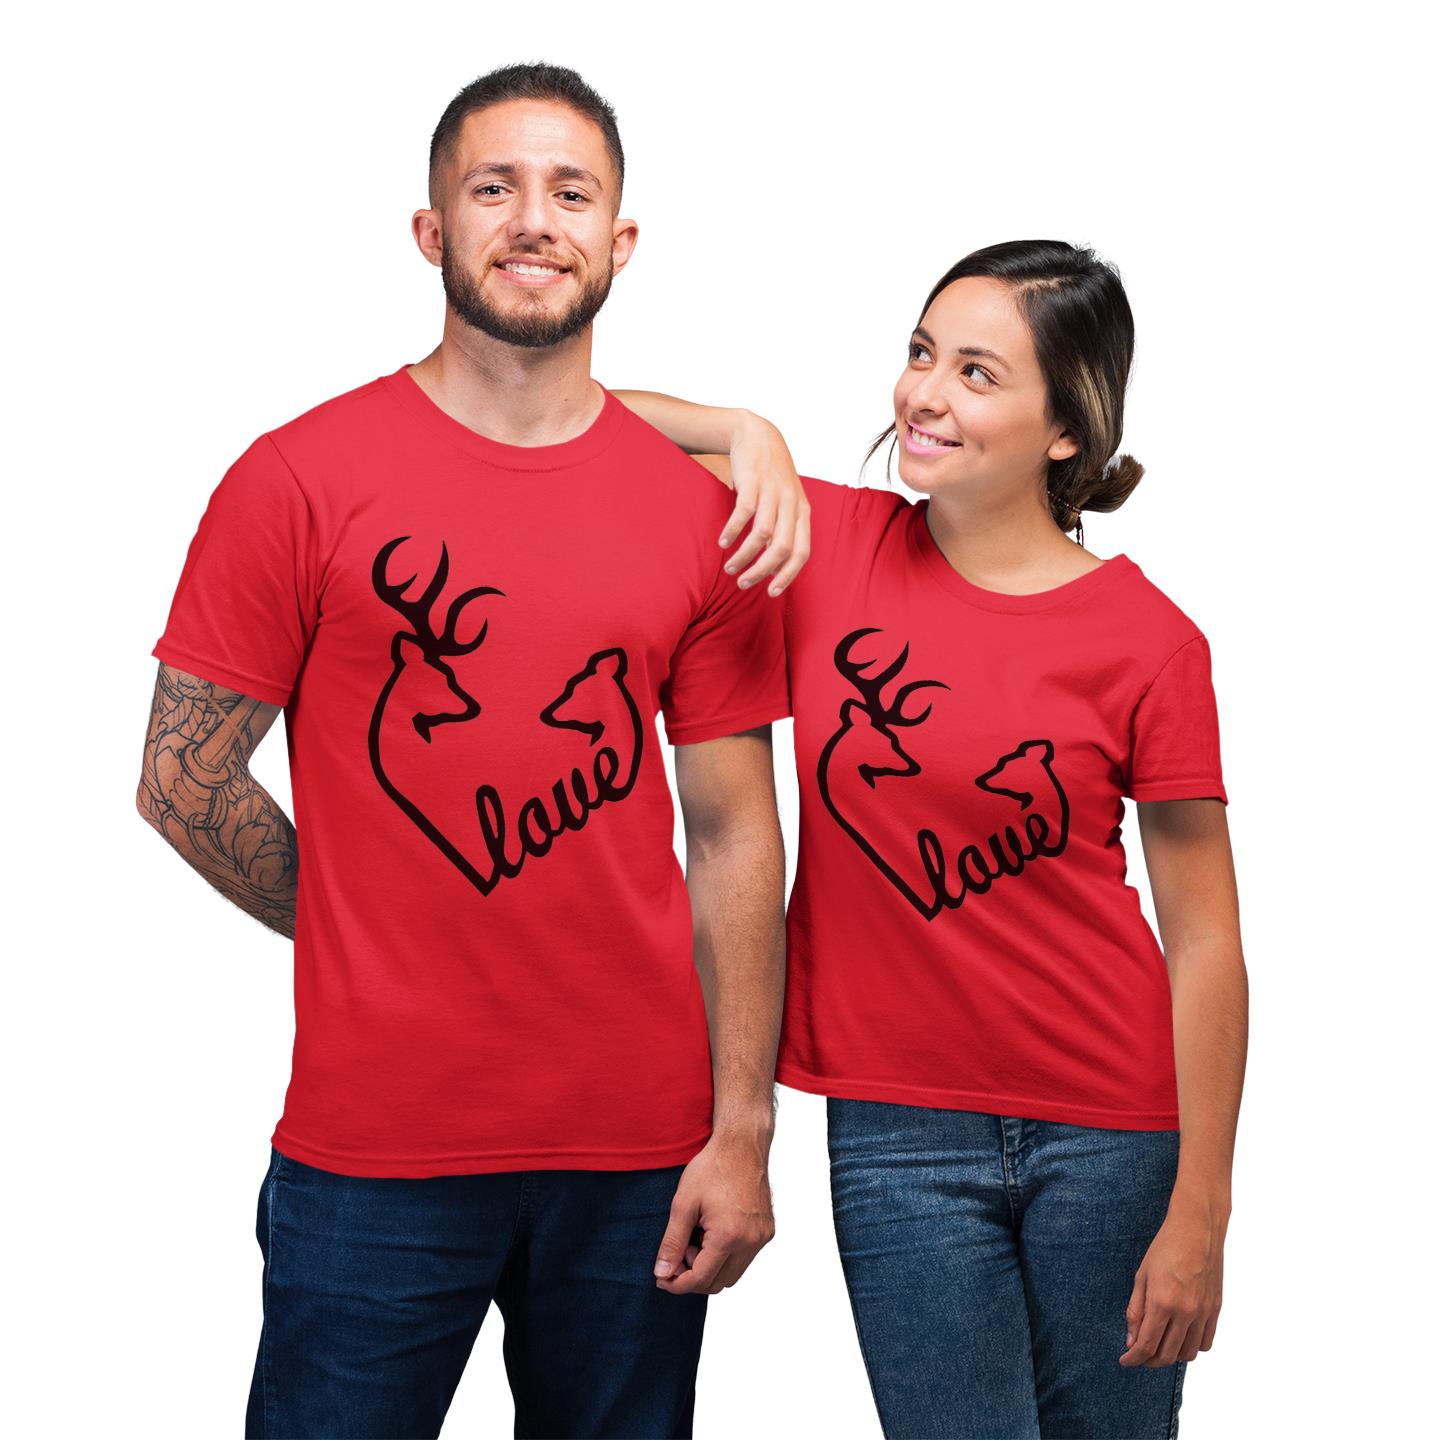 Deer Love His And Her Shirt For Couples Lover Matching T-shirt